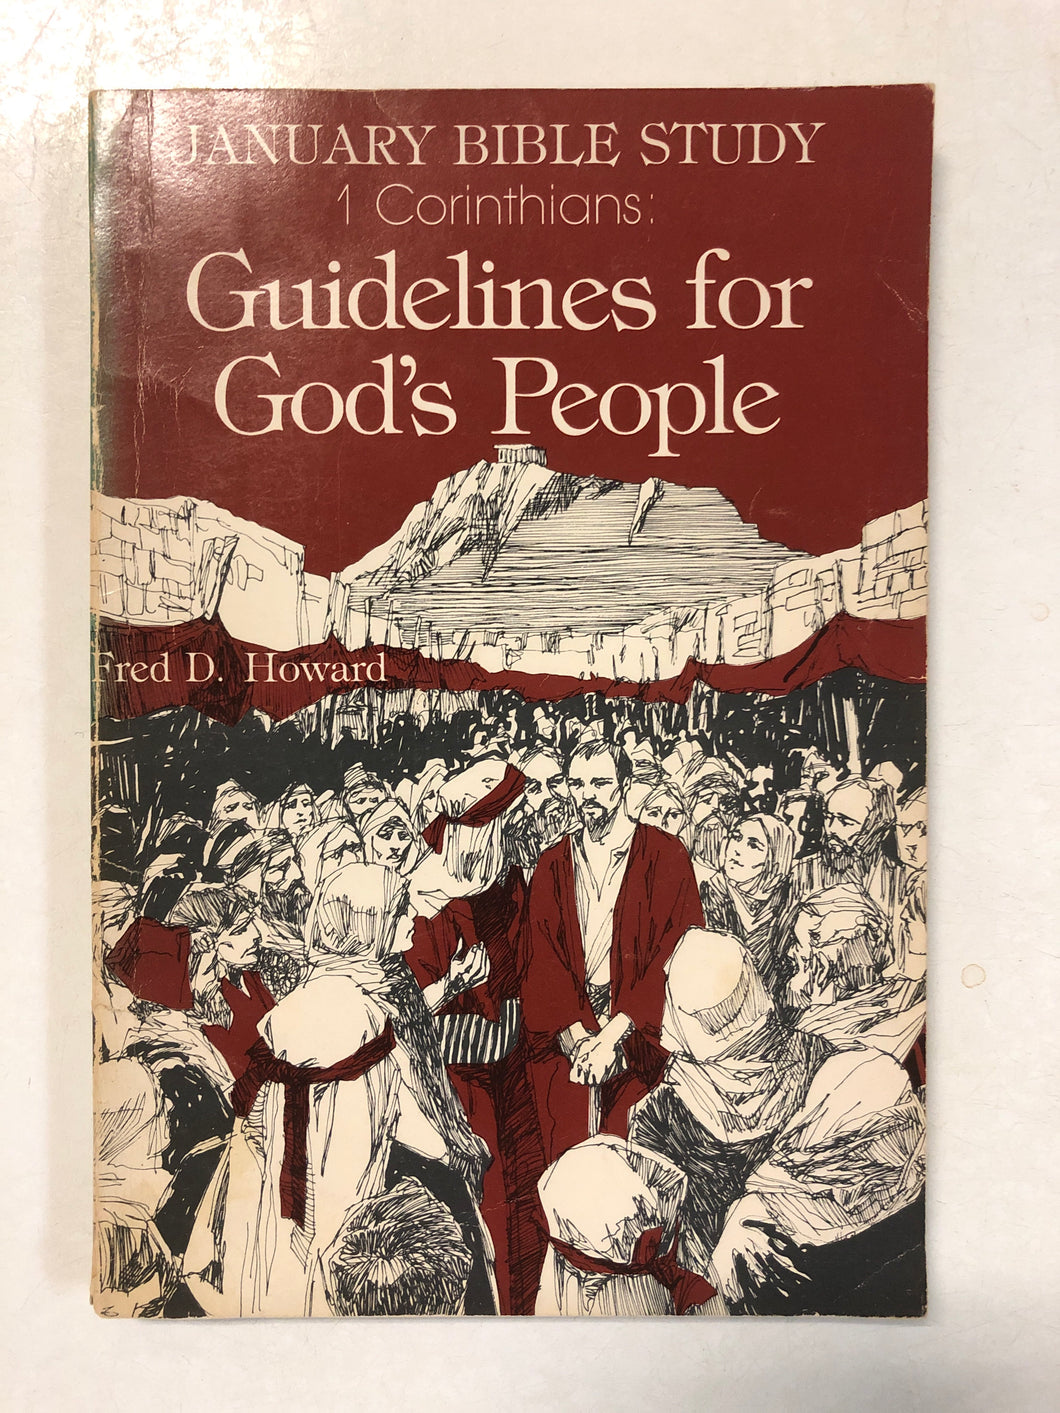 January Bible Study 1 Corinthians: Guidelines for God’s People - Slick Cat Books 